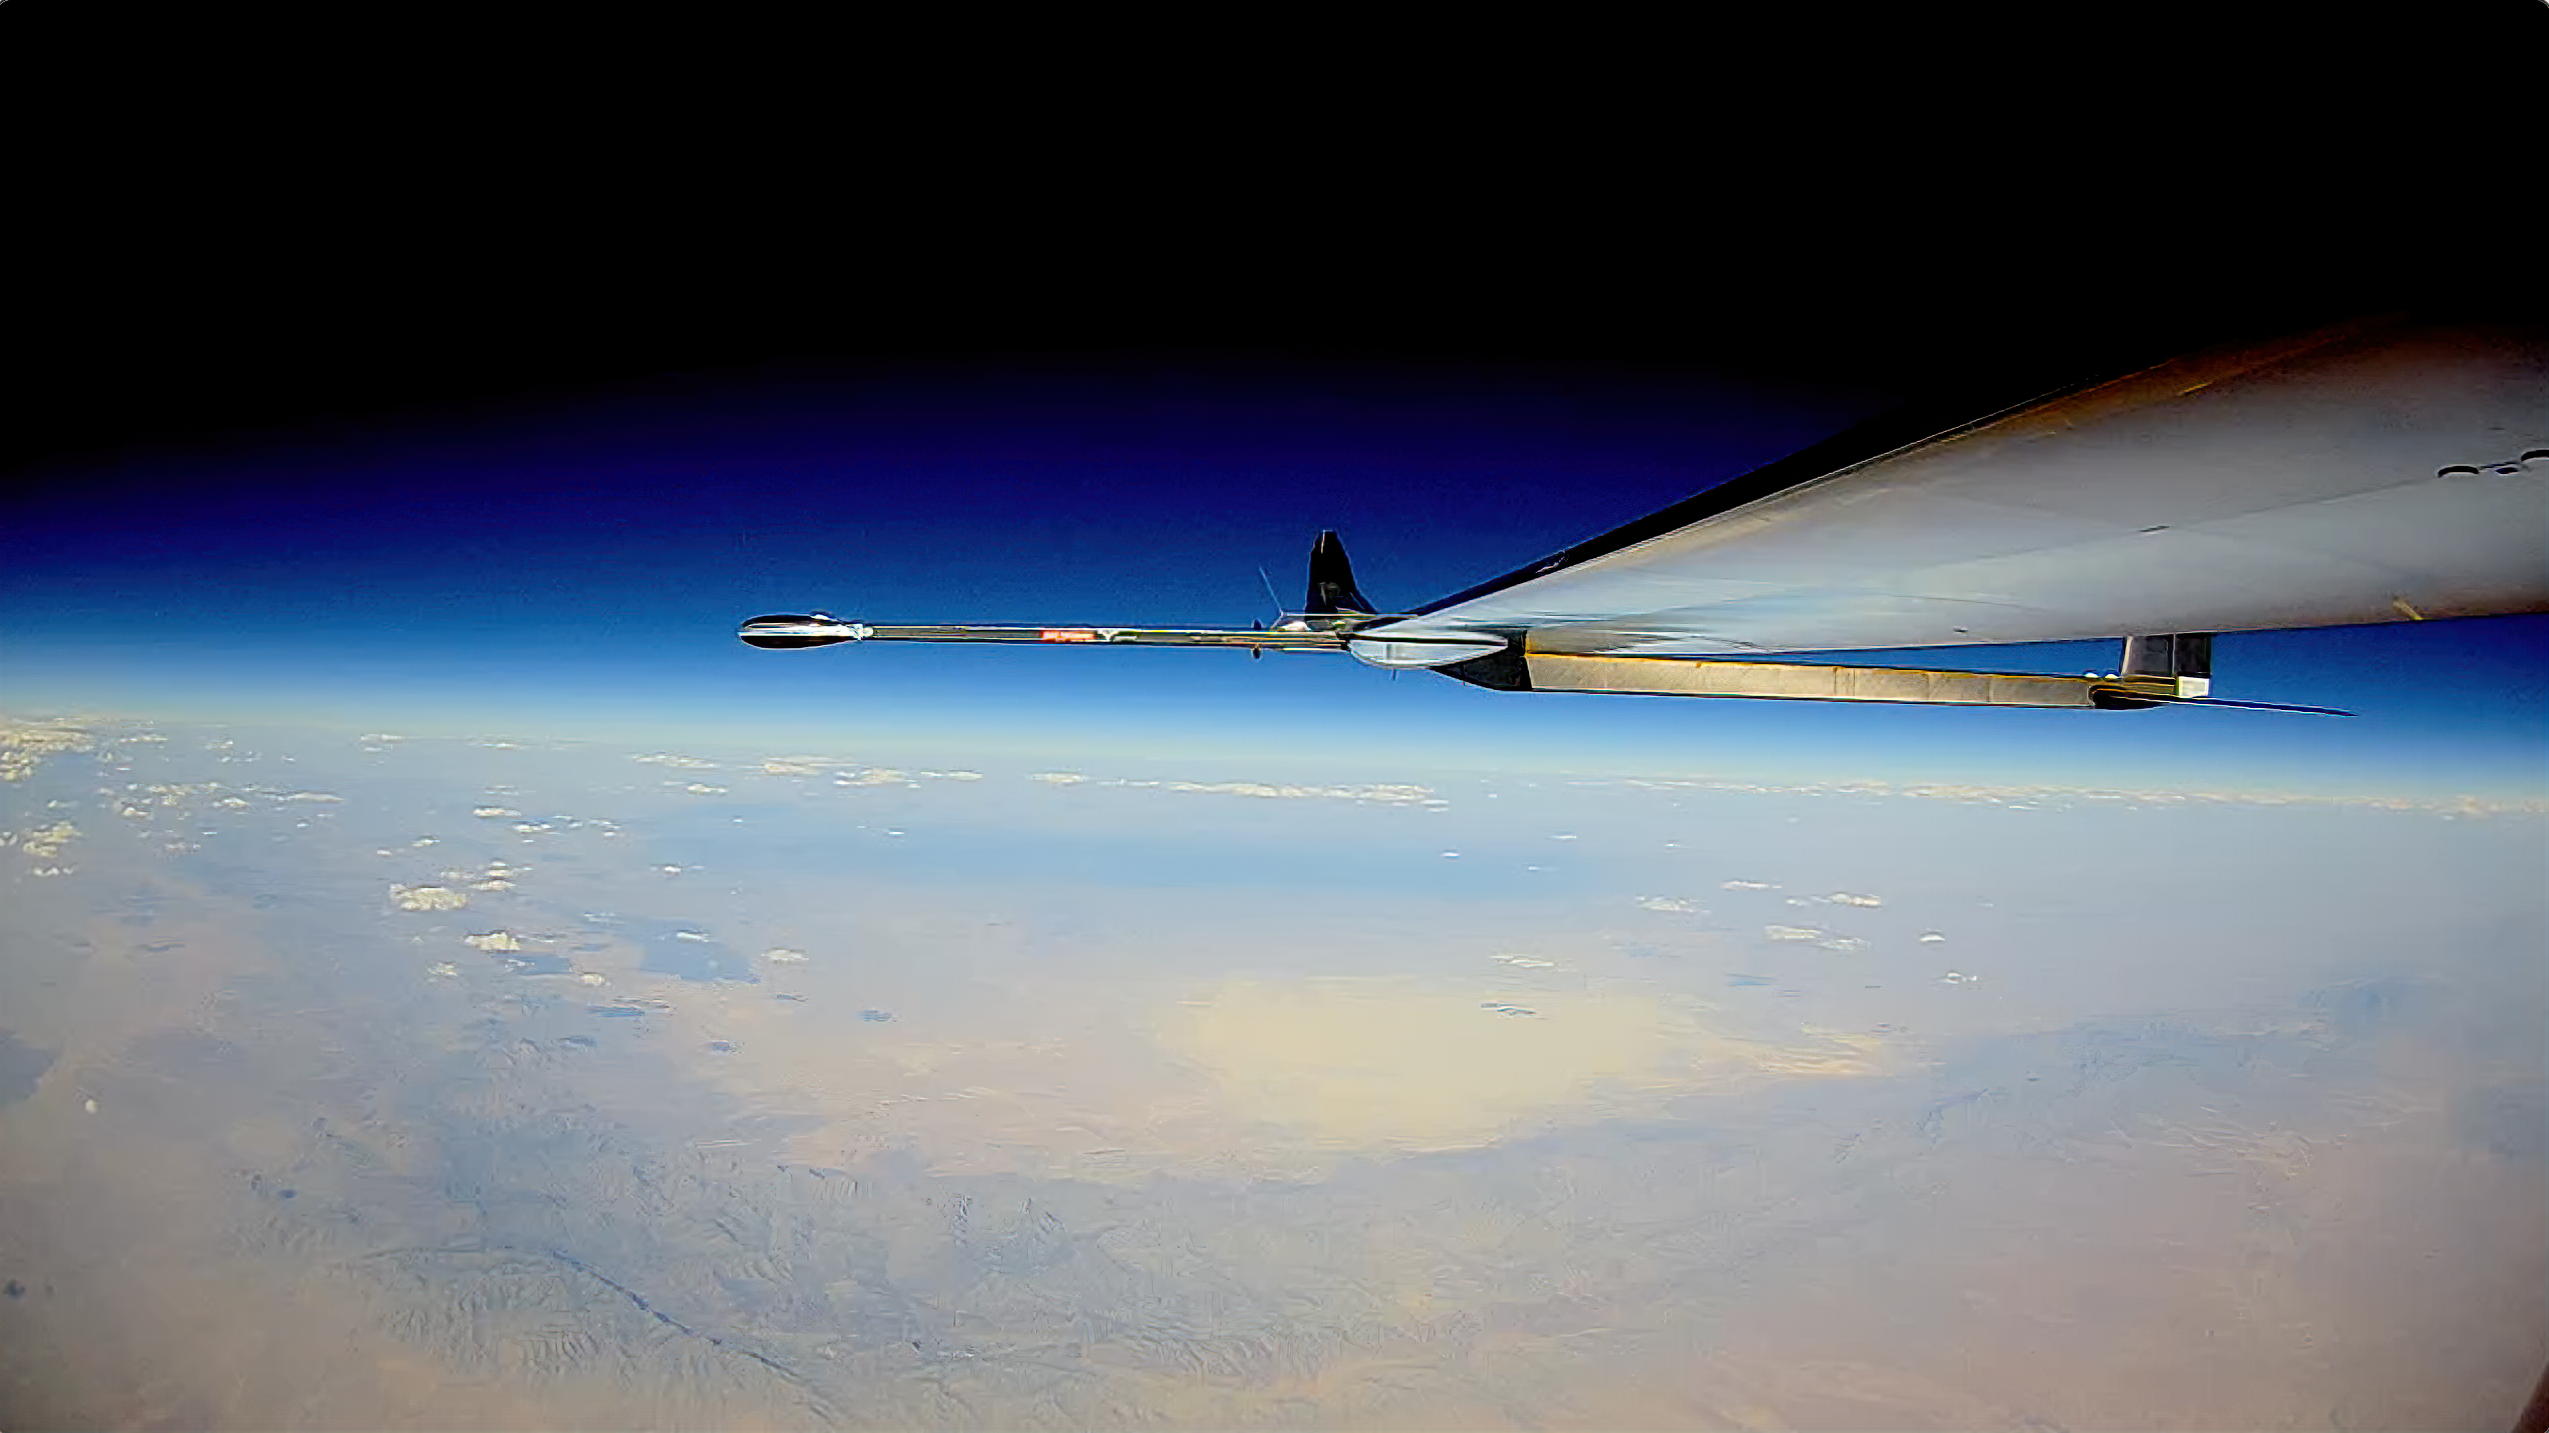 The wing of the PHASA-35 aircraft with the earth below and the darkness of space above at 66,000ft.